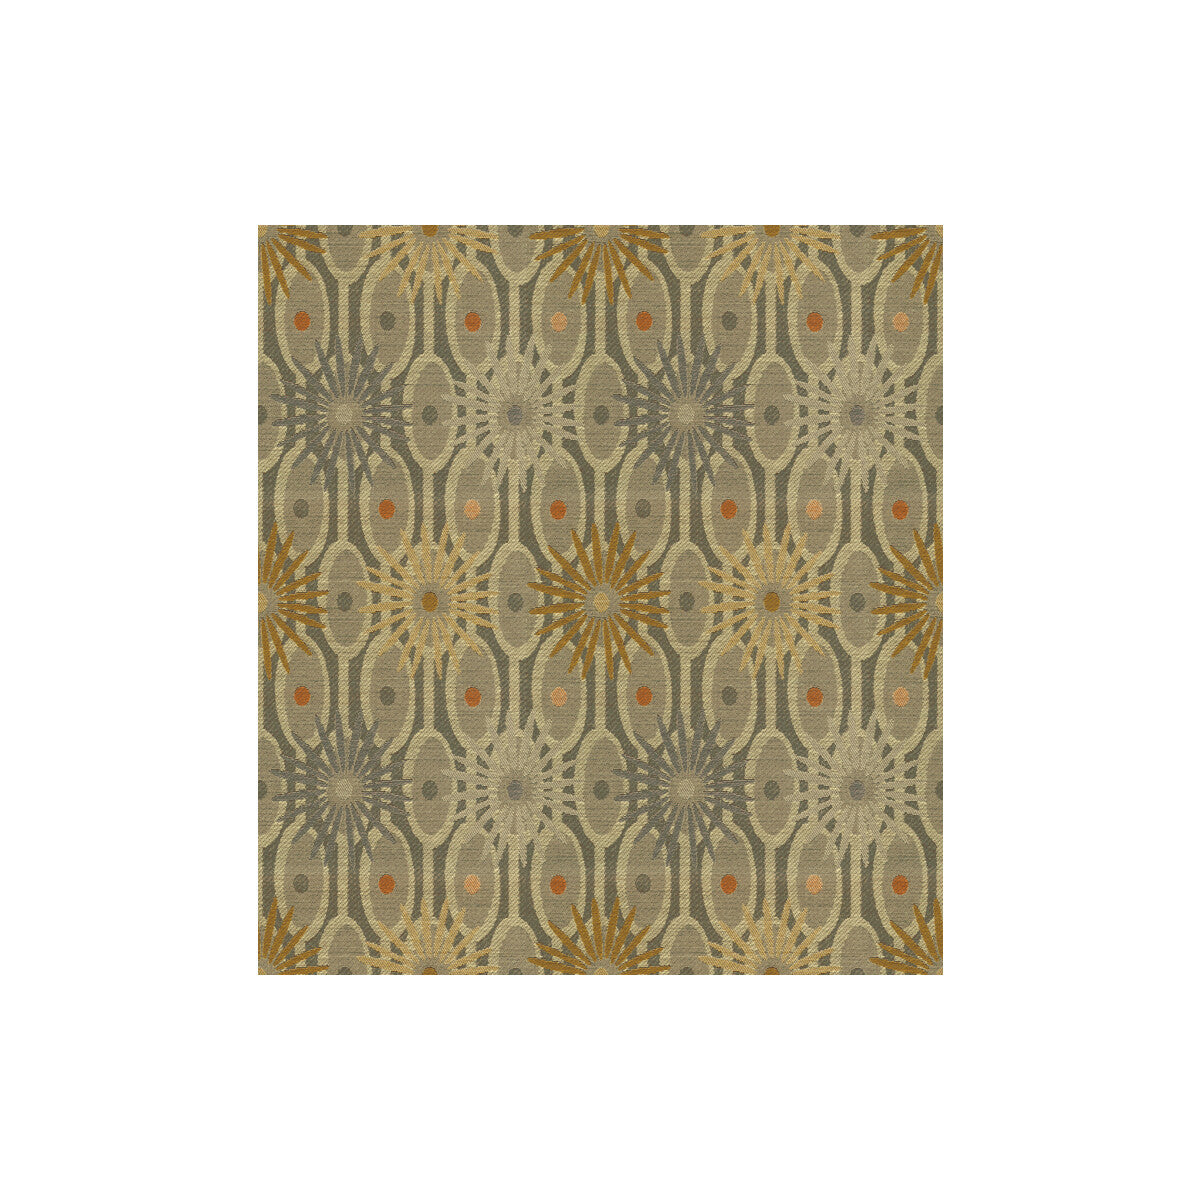 Burst Out fabric in toffee color - pattern 32894.1211.0 - by Kravet Contract in the Contract Gis collection